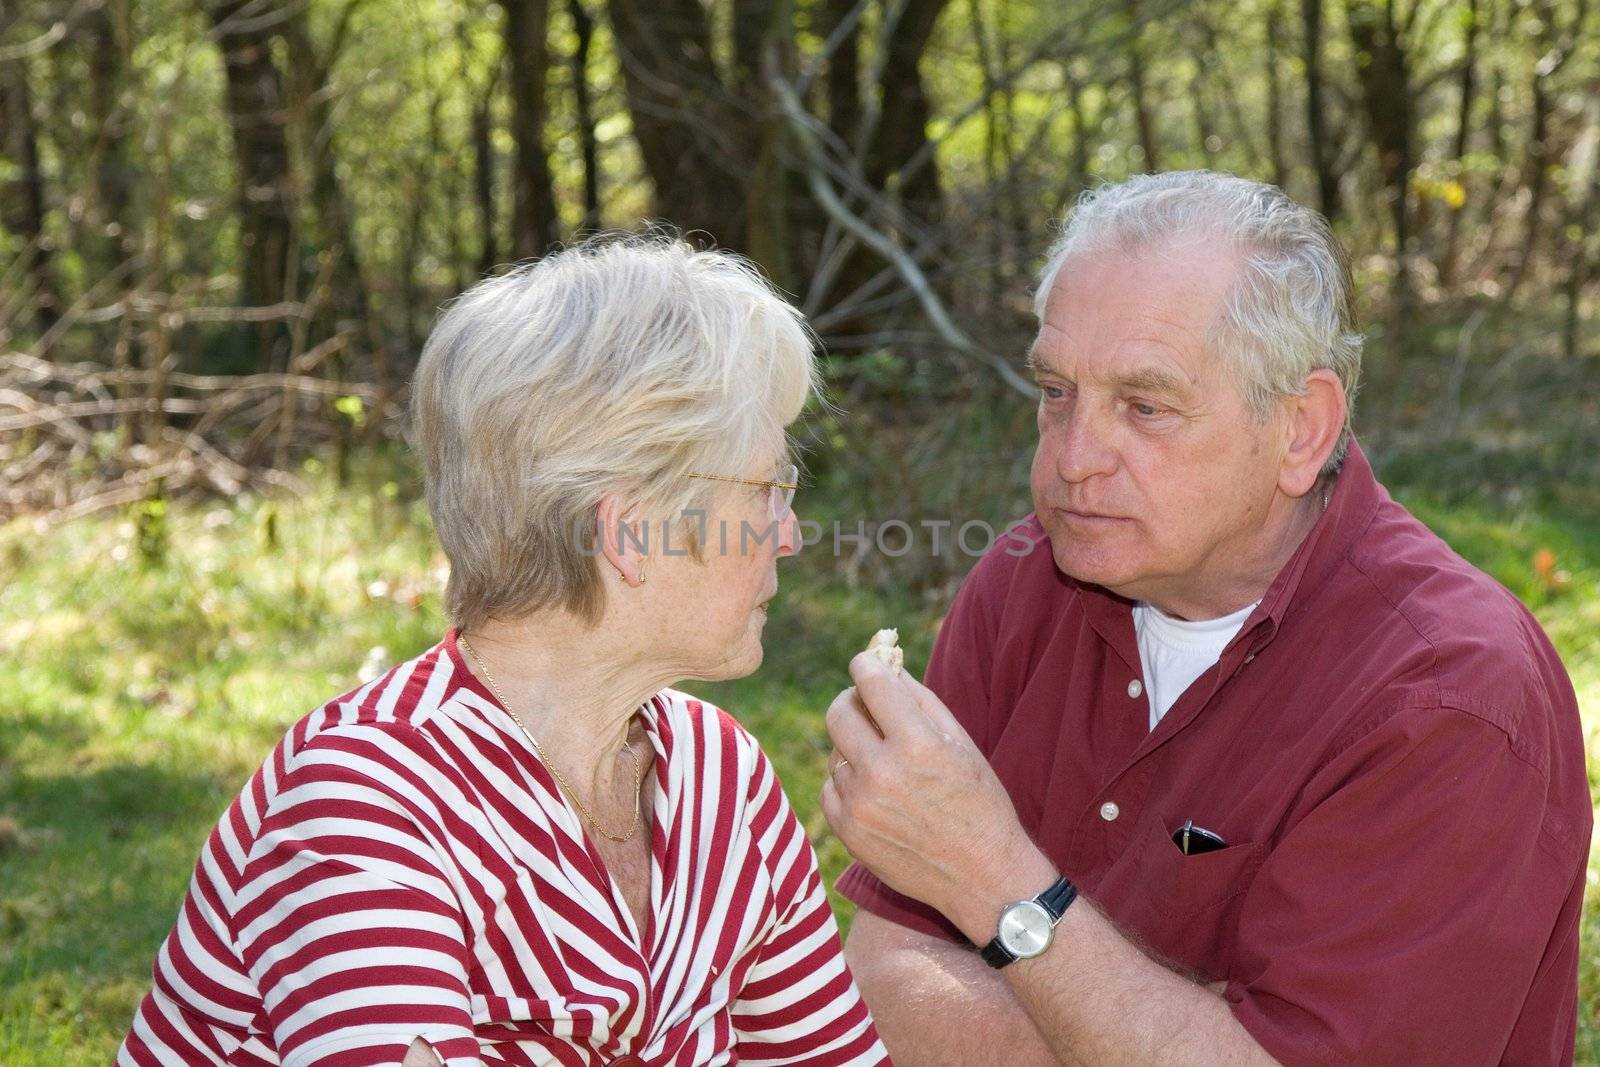 Elderly couple having a picnic together in the forest